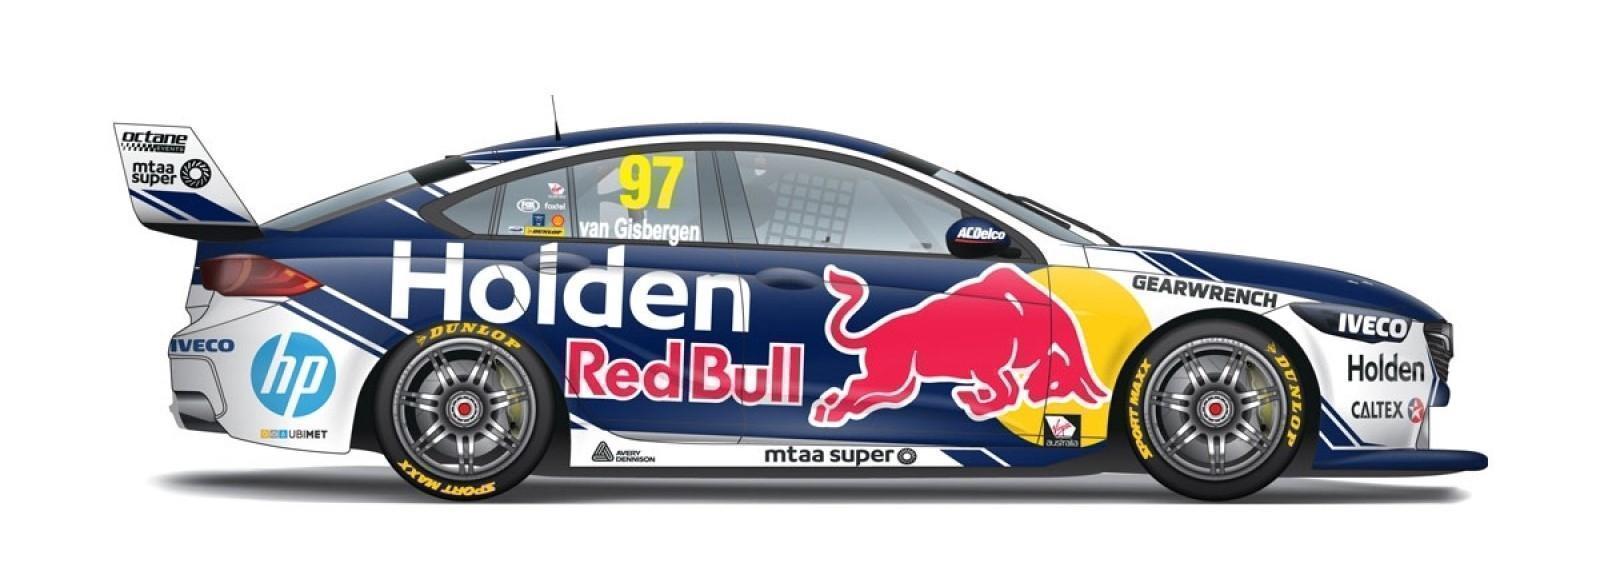 PRE ORDER - 2020 #88 Jamie Whincup Red Bull Holden Racing Team Season Car Holden ZB Commodore 1:18 Scale Model Car (FULL PRICE - $179.00*)